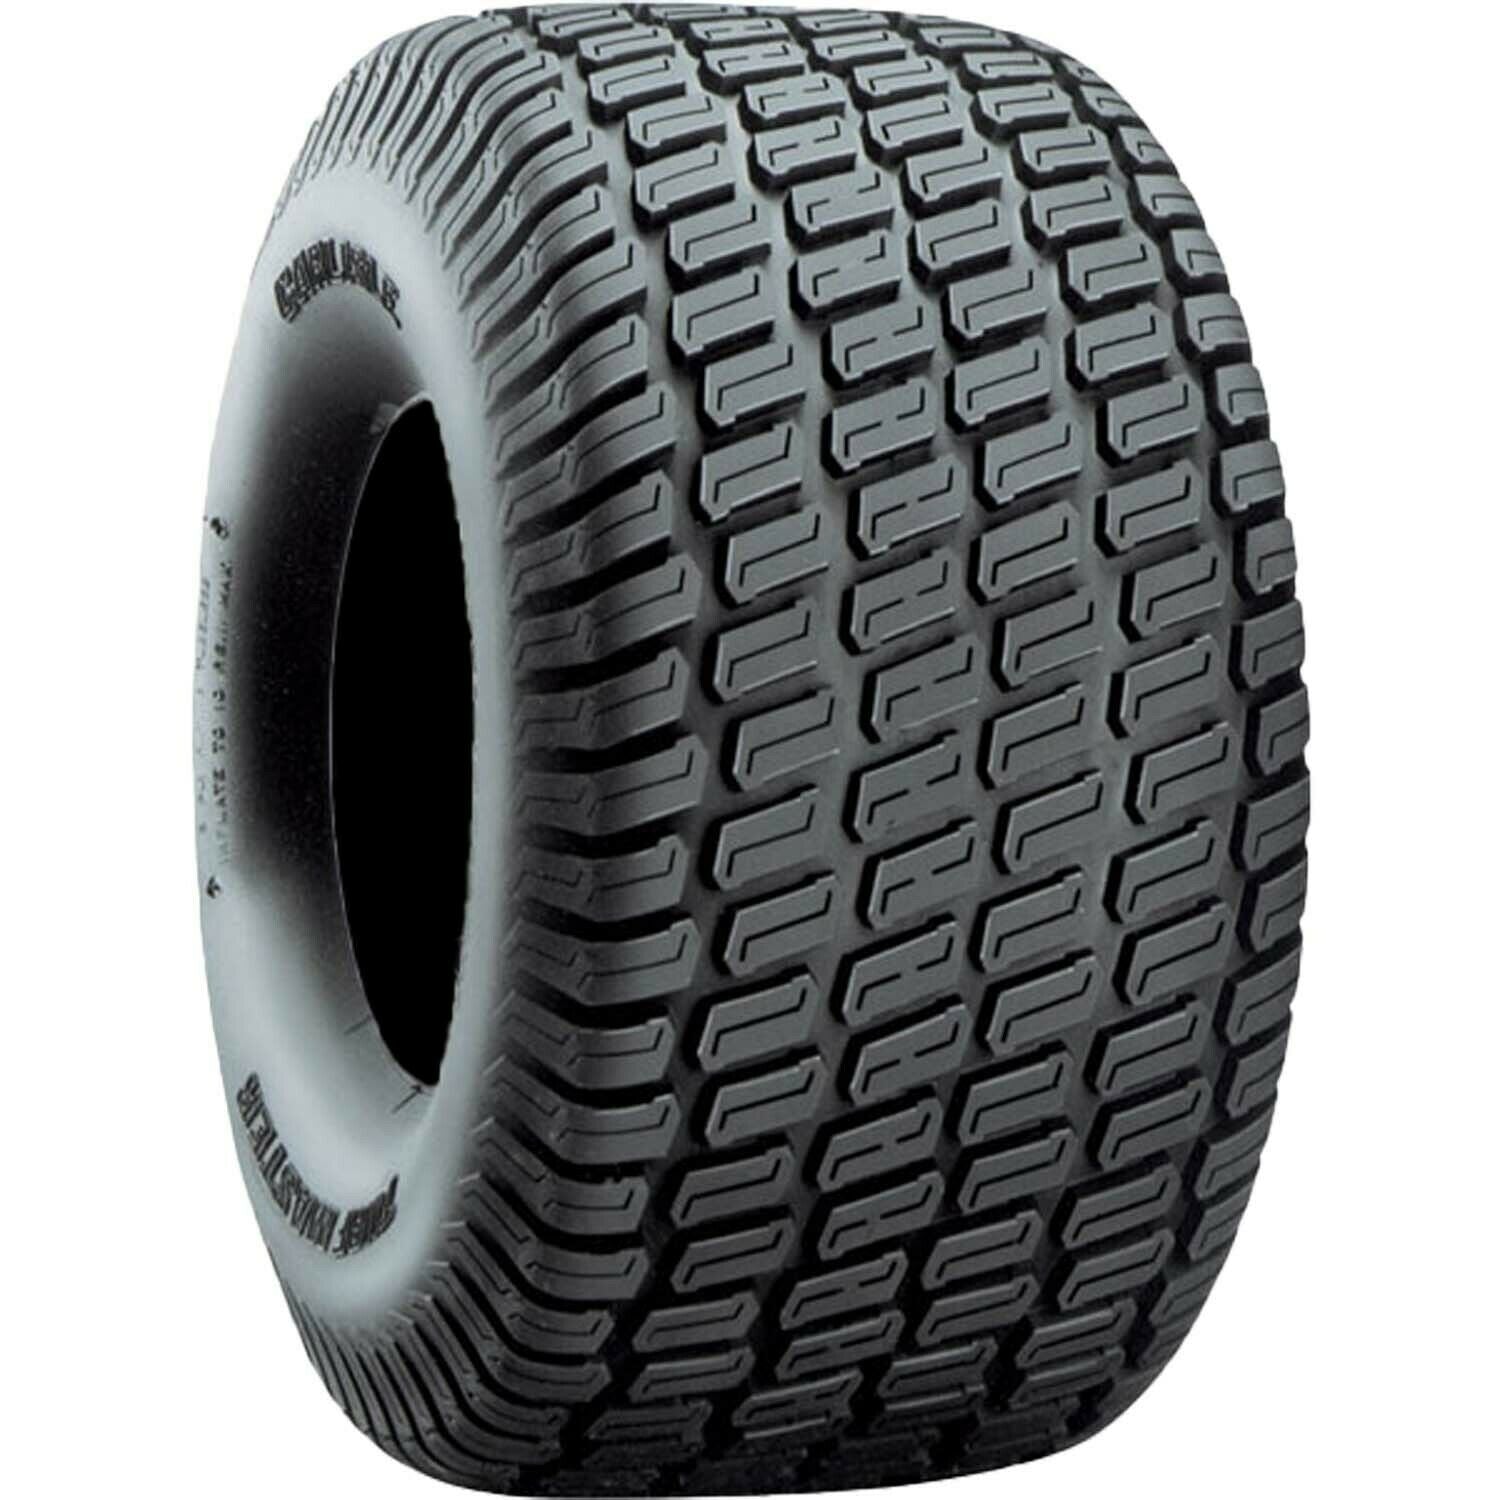 Carlisle Turf Master Lawn and Garden Tire 4Ply 22x10.00-10